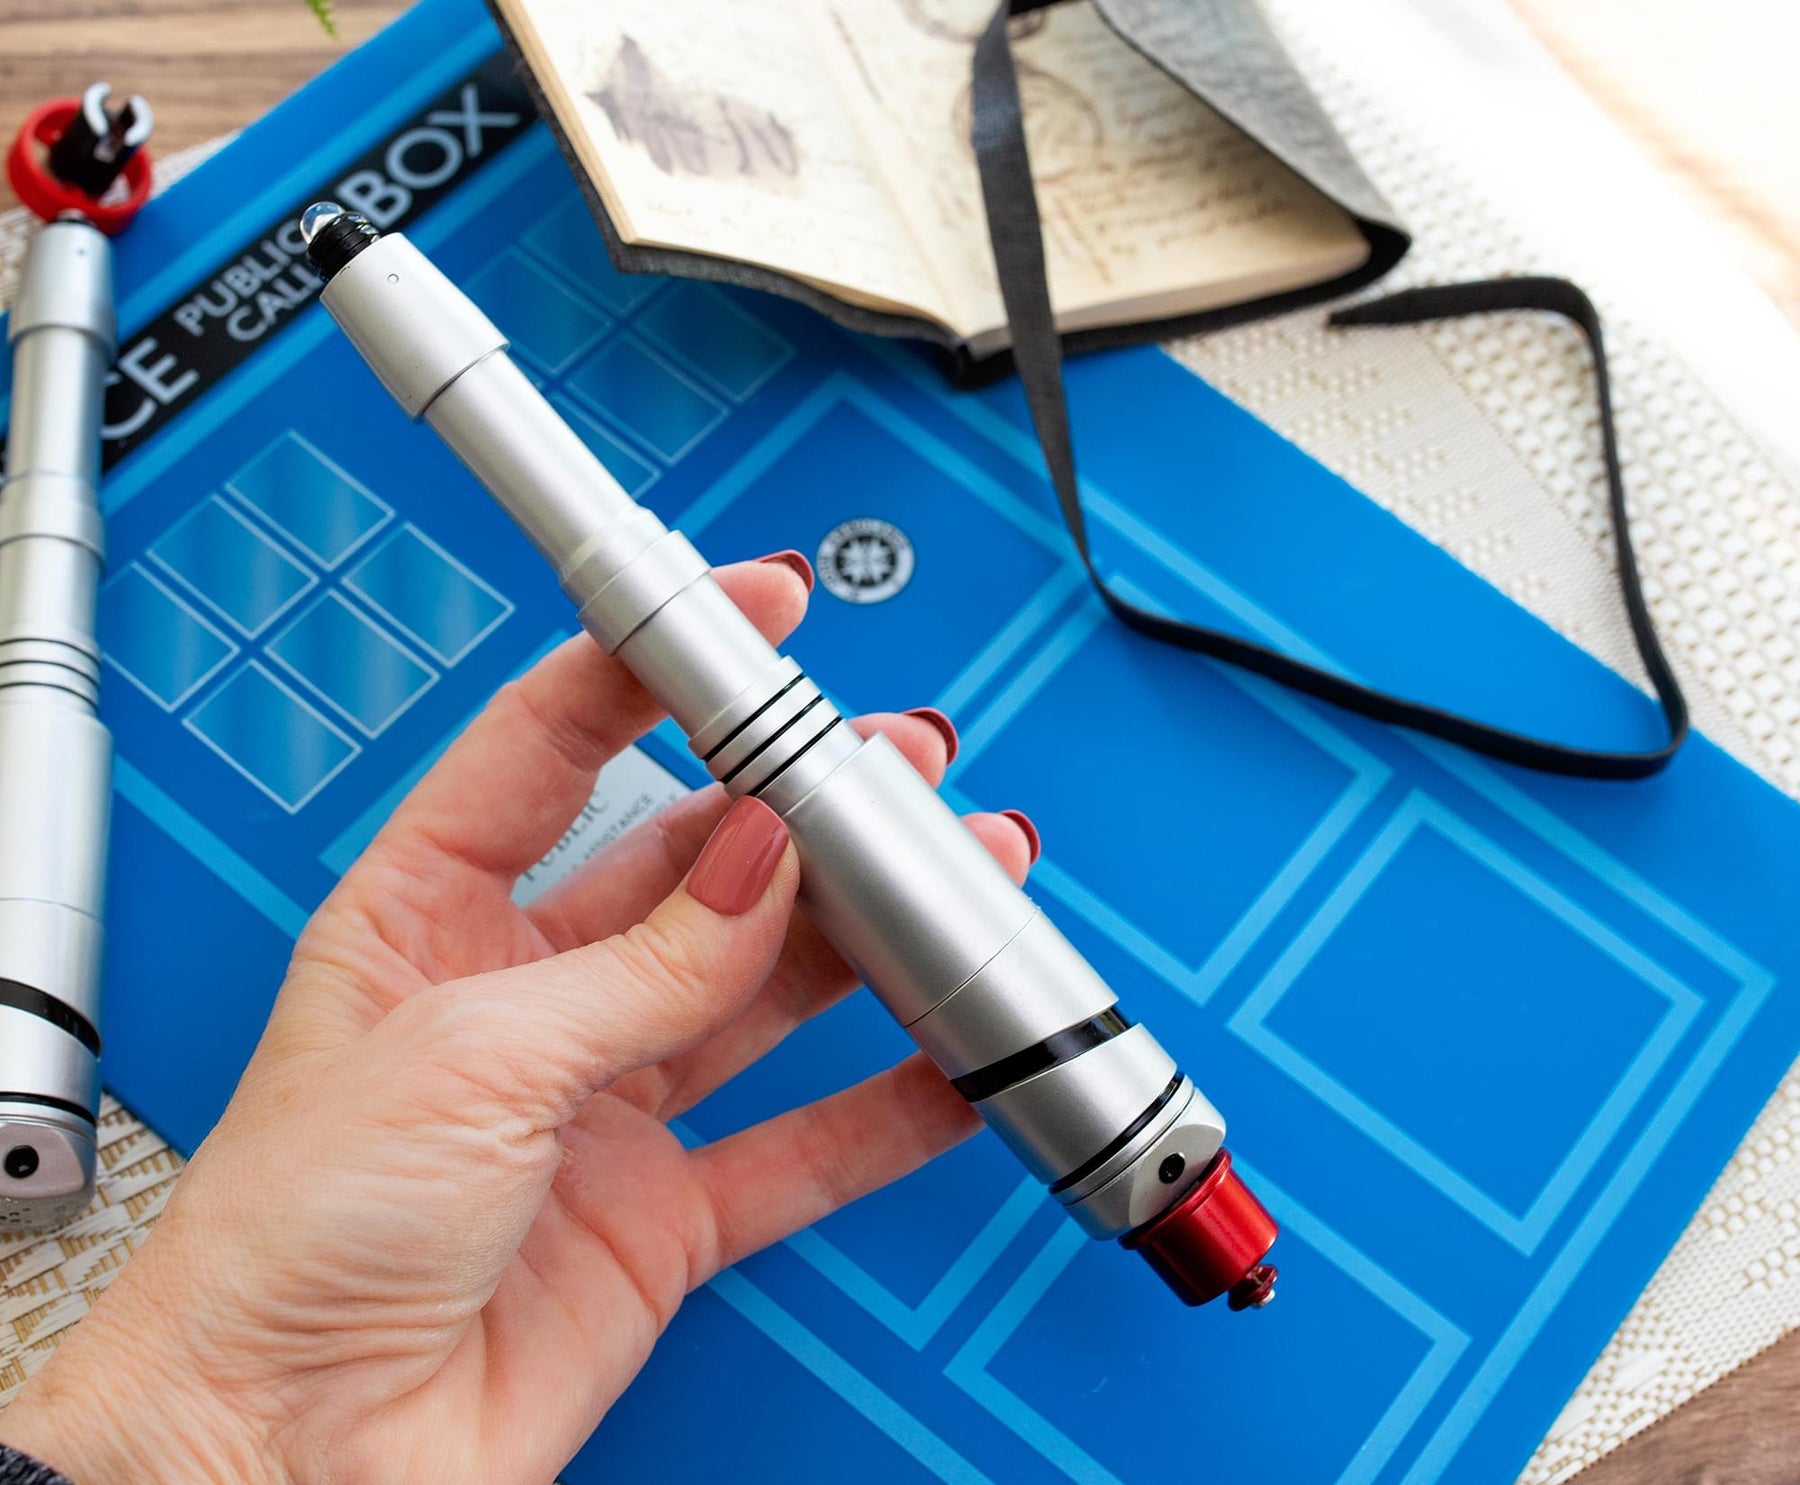 Doctor Who The Other Doctor's John Hurt Version Sonic Screwdriver